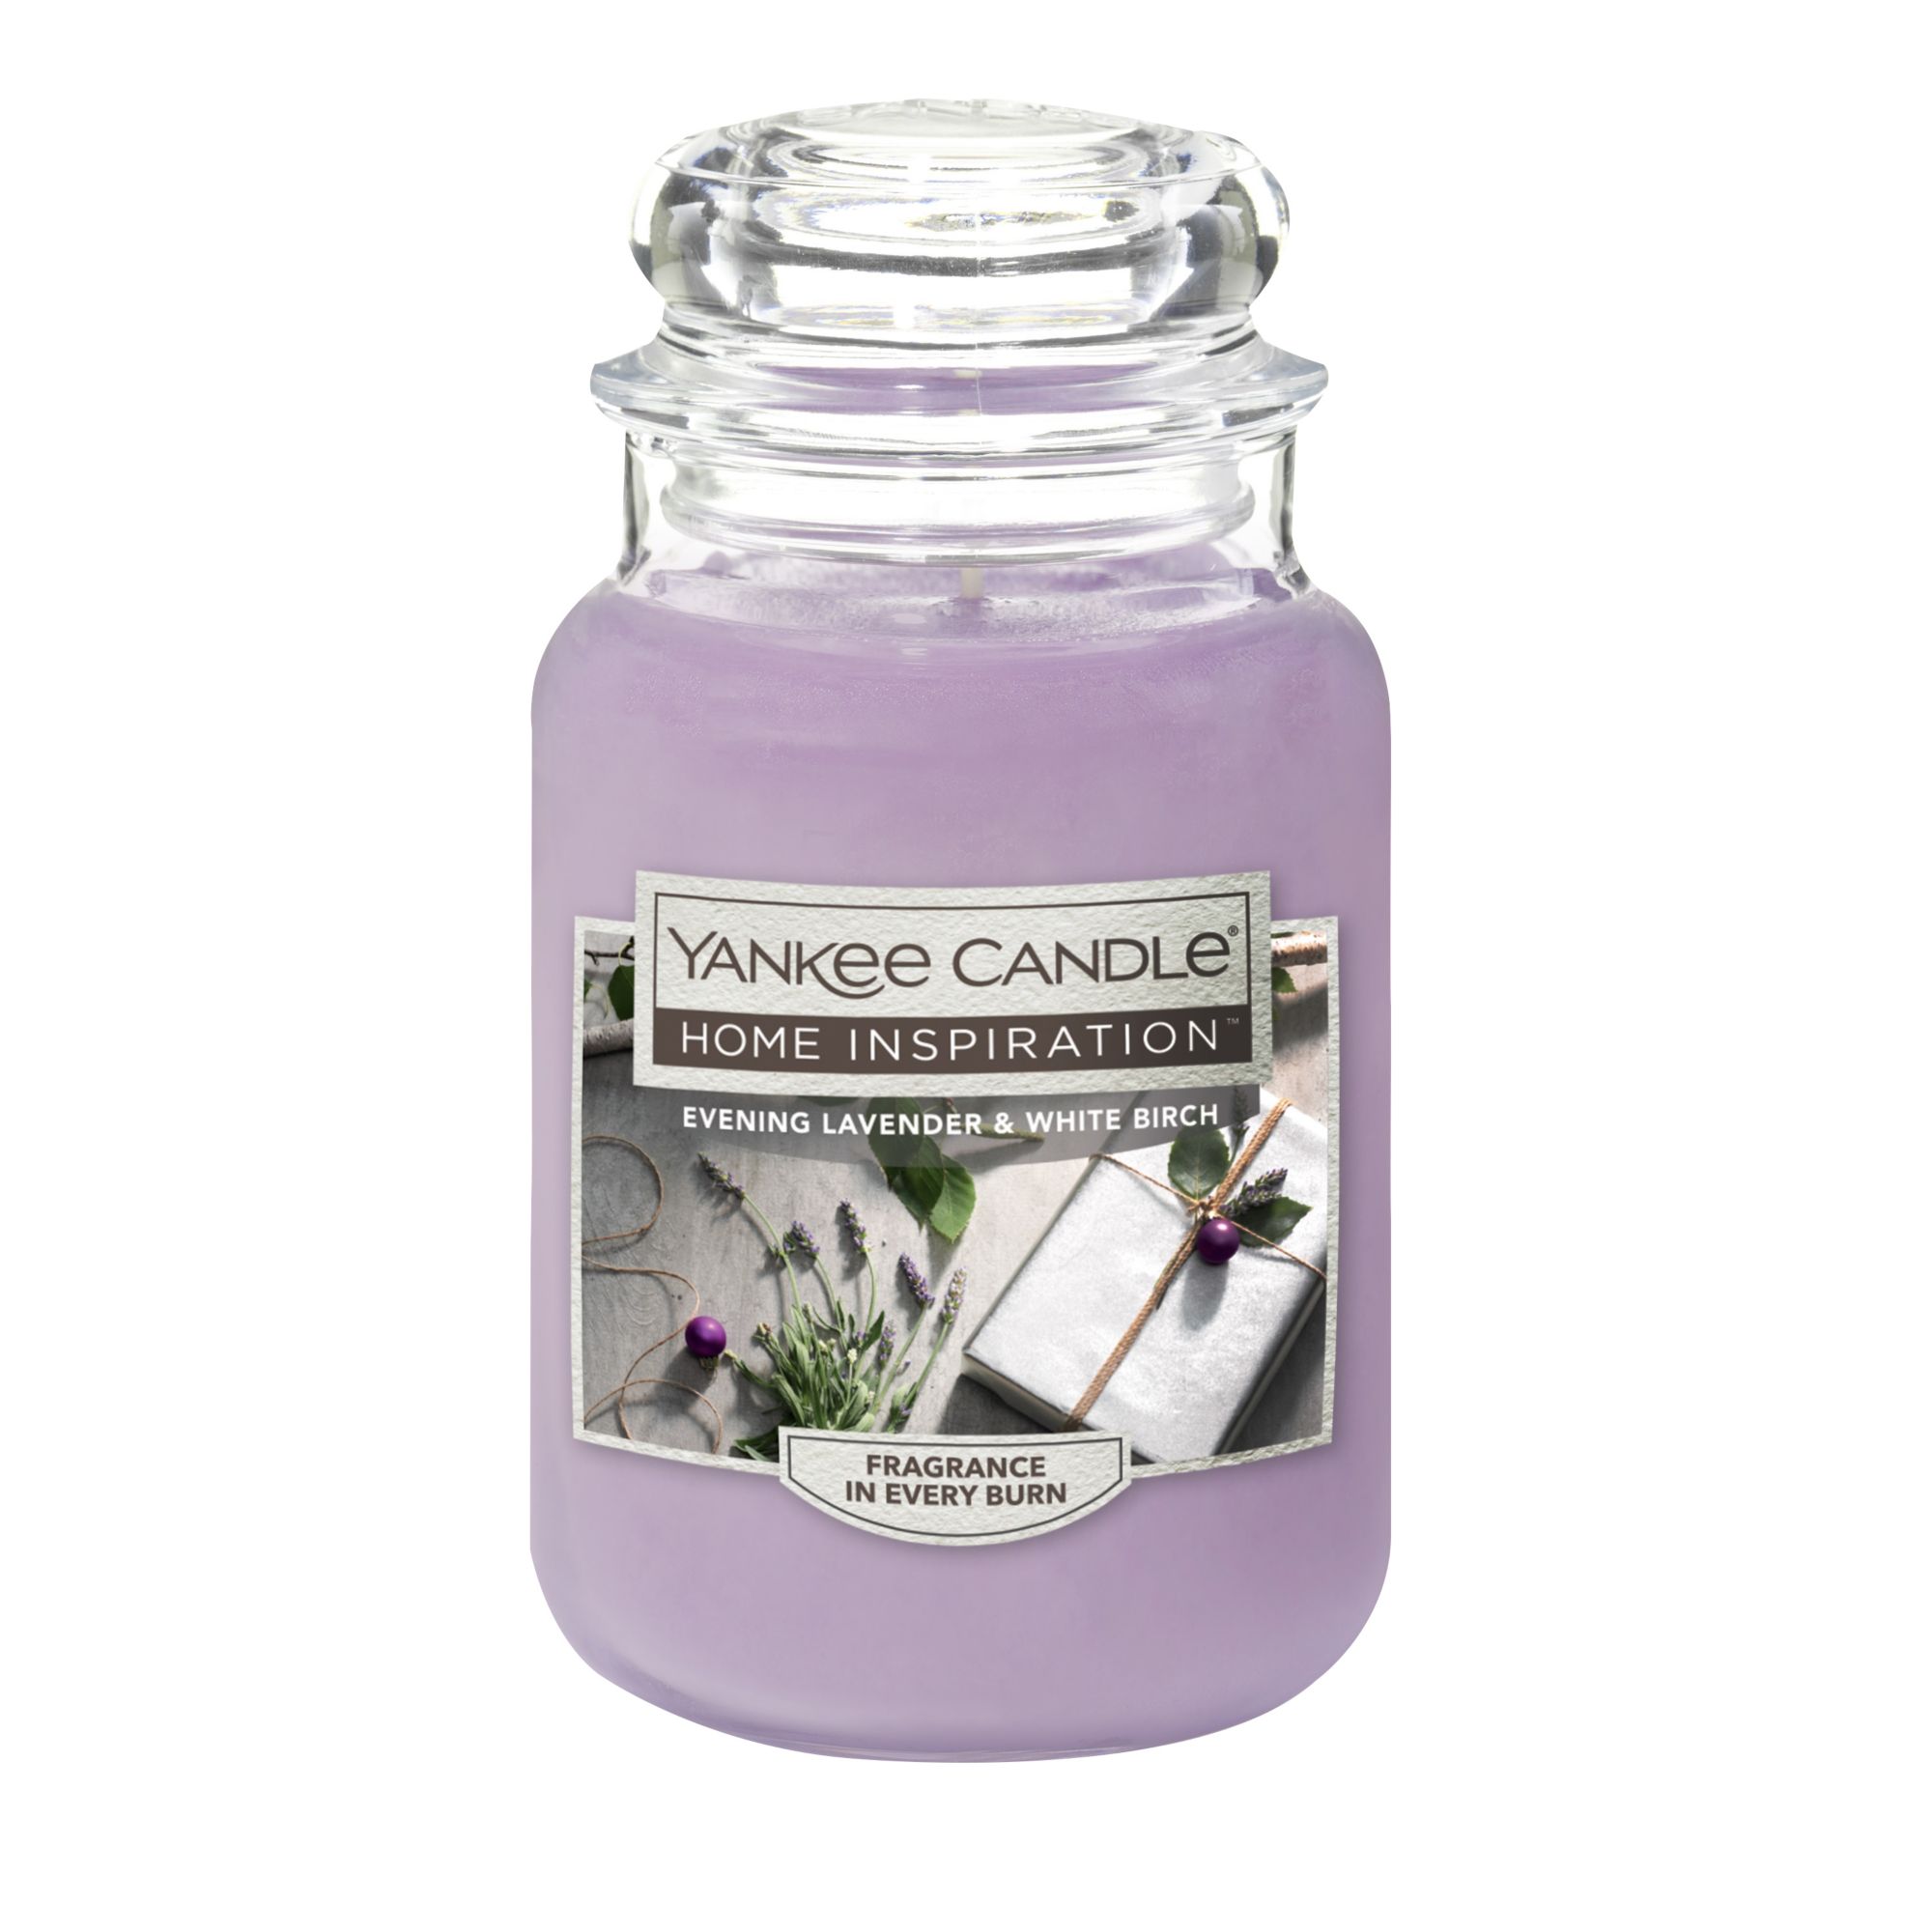 Yankee Candle Home Inspirations Evening Lavender and White Birch Candle ...